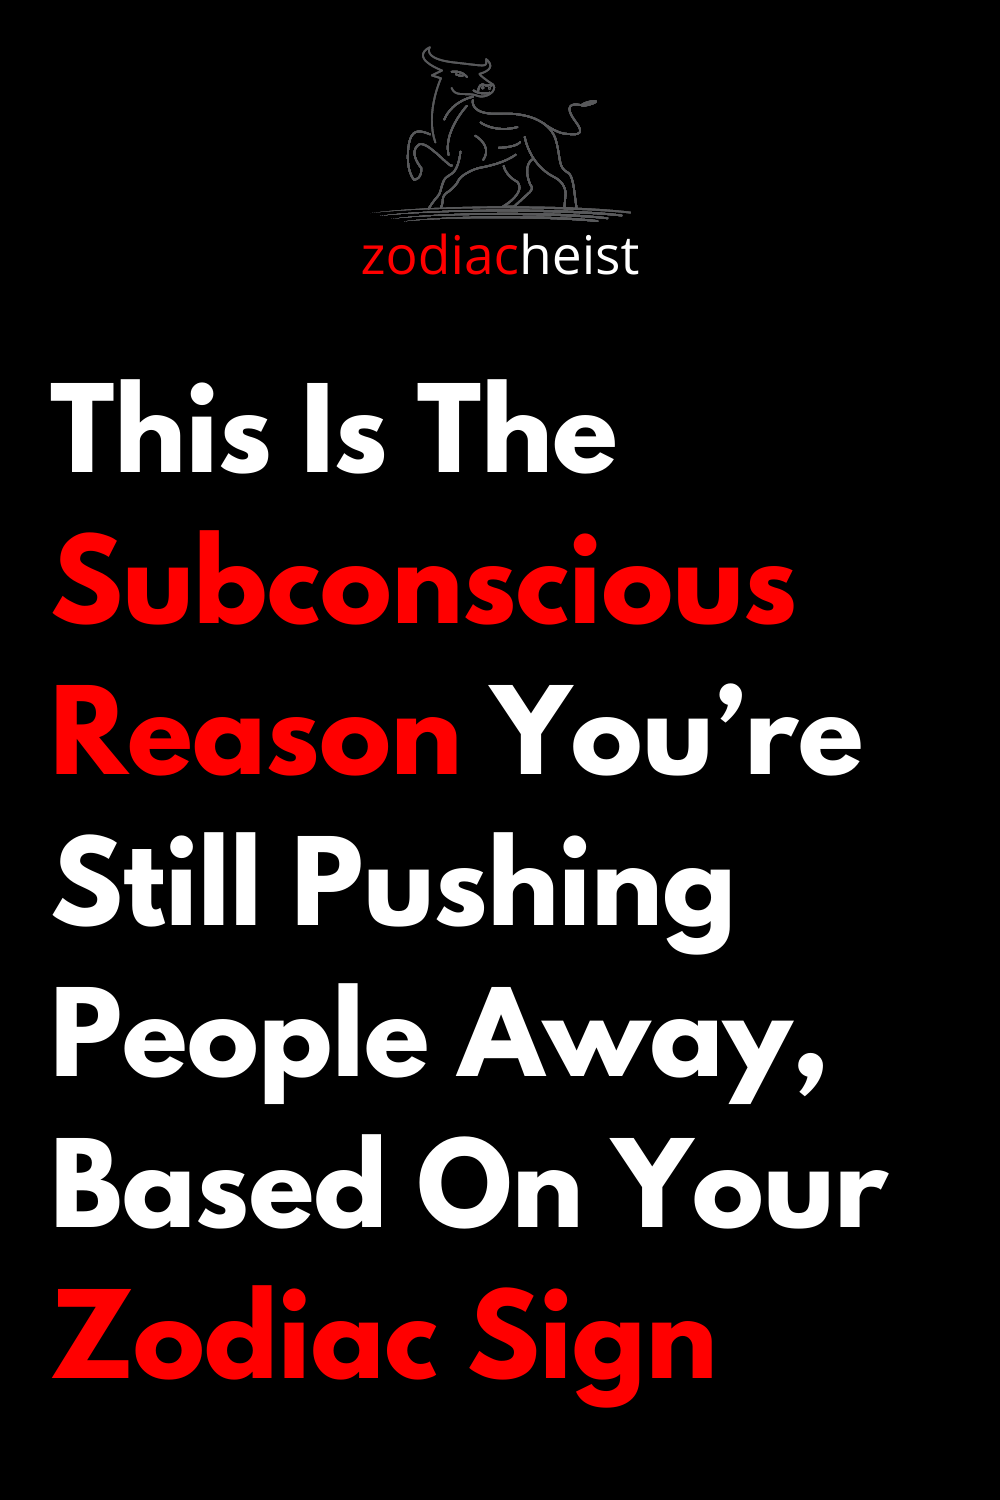 This Is The Subconscious Reason You’re Still Pushing People Away, Based On Your Zodiac Sign